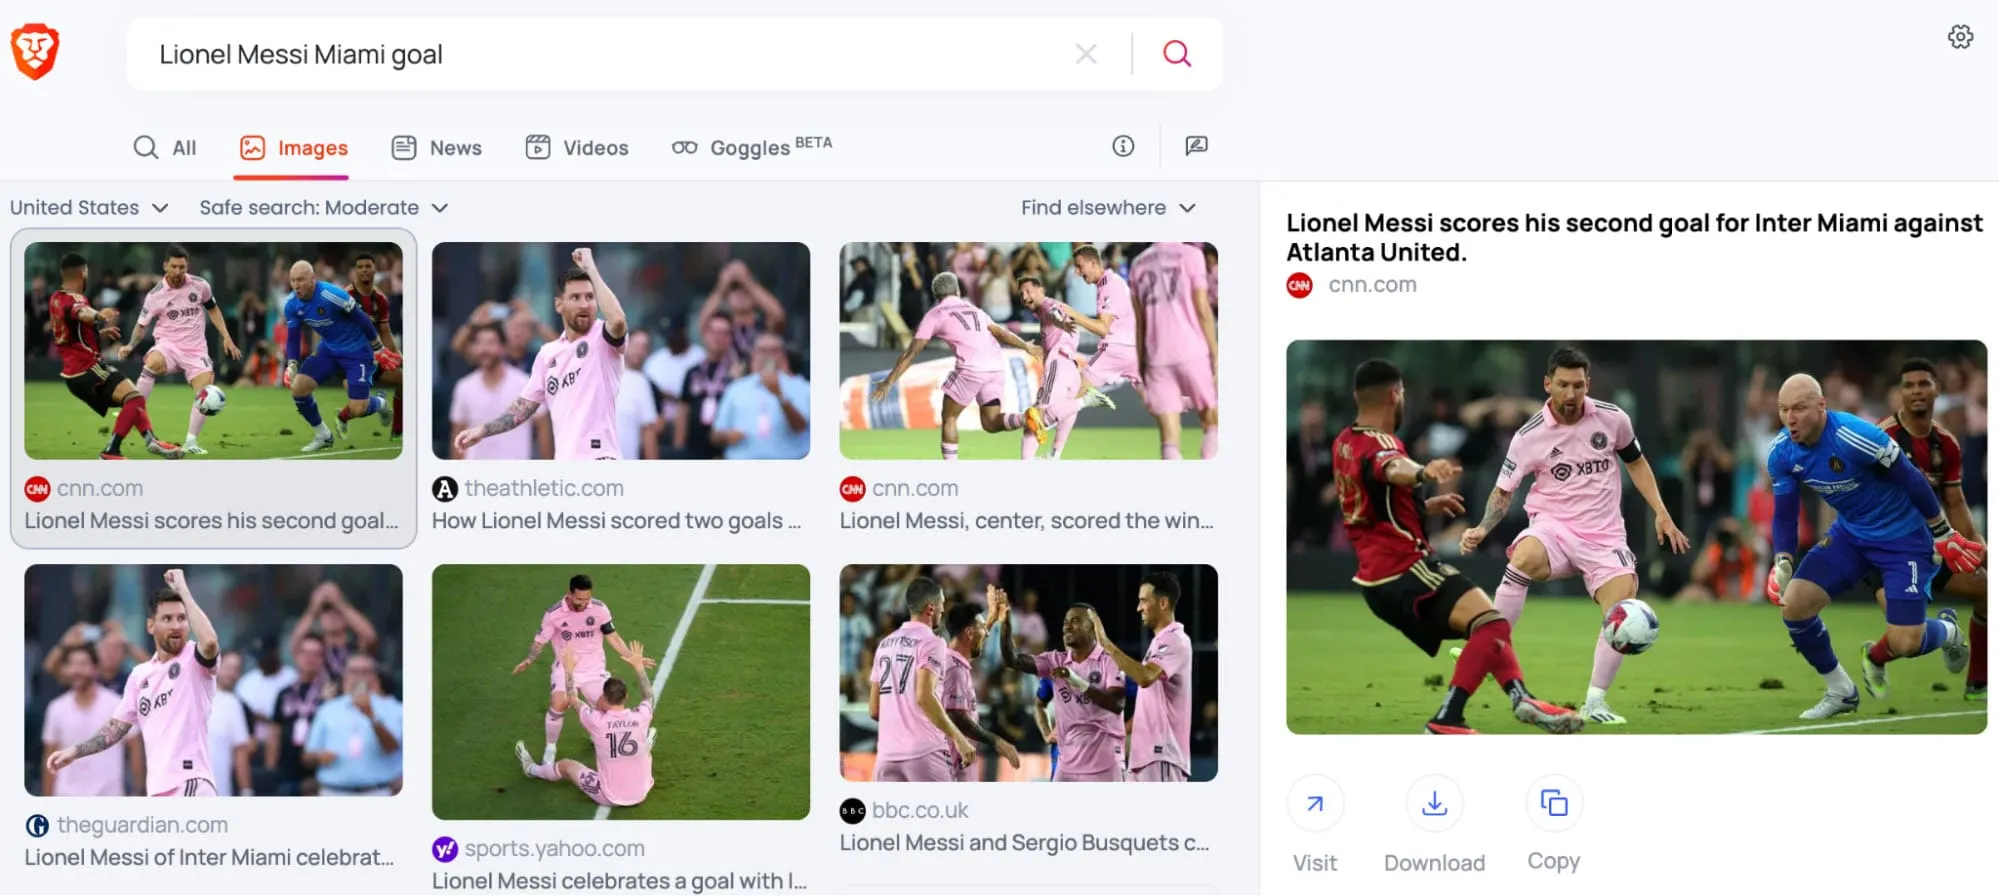 Brave Finally Launches the "Image and Video Search" Feature